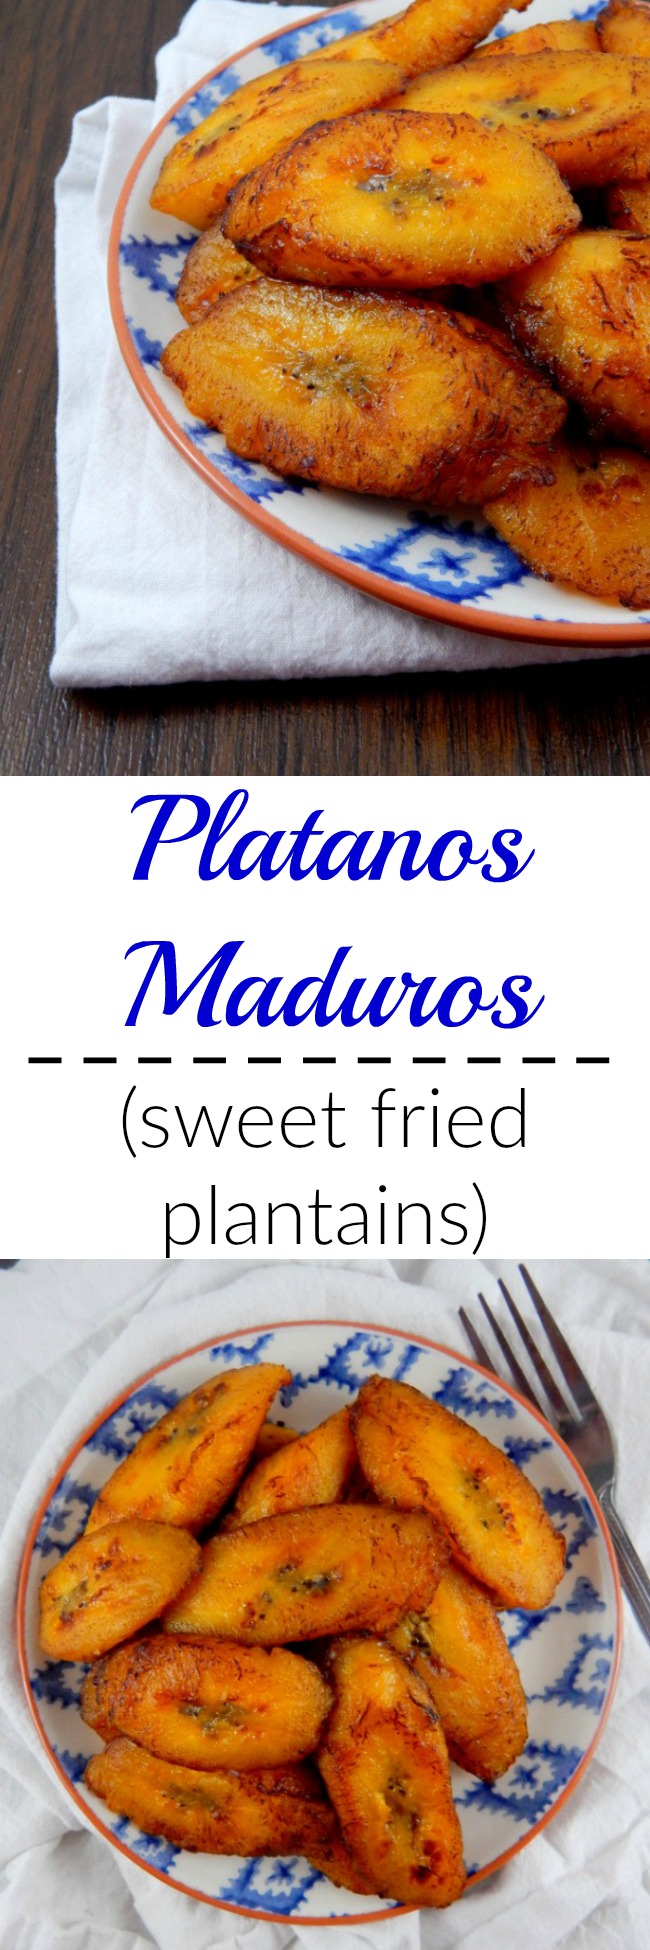 Platanos maduros - or sweet fried plantains - are a tasty side and a yummy traditional Latin American dish. 